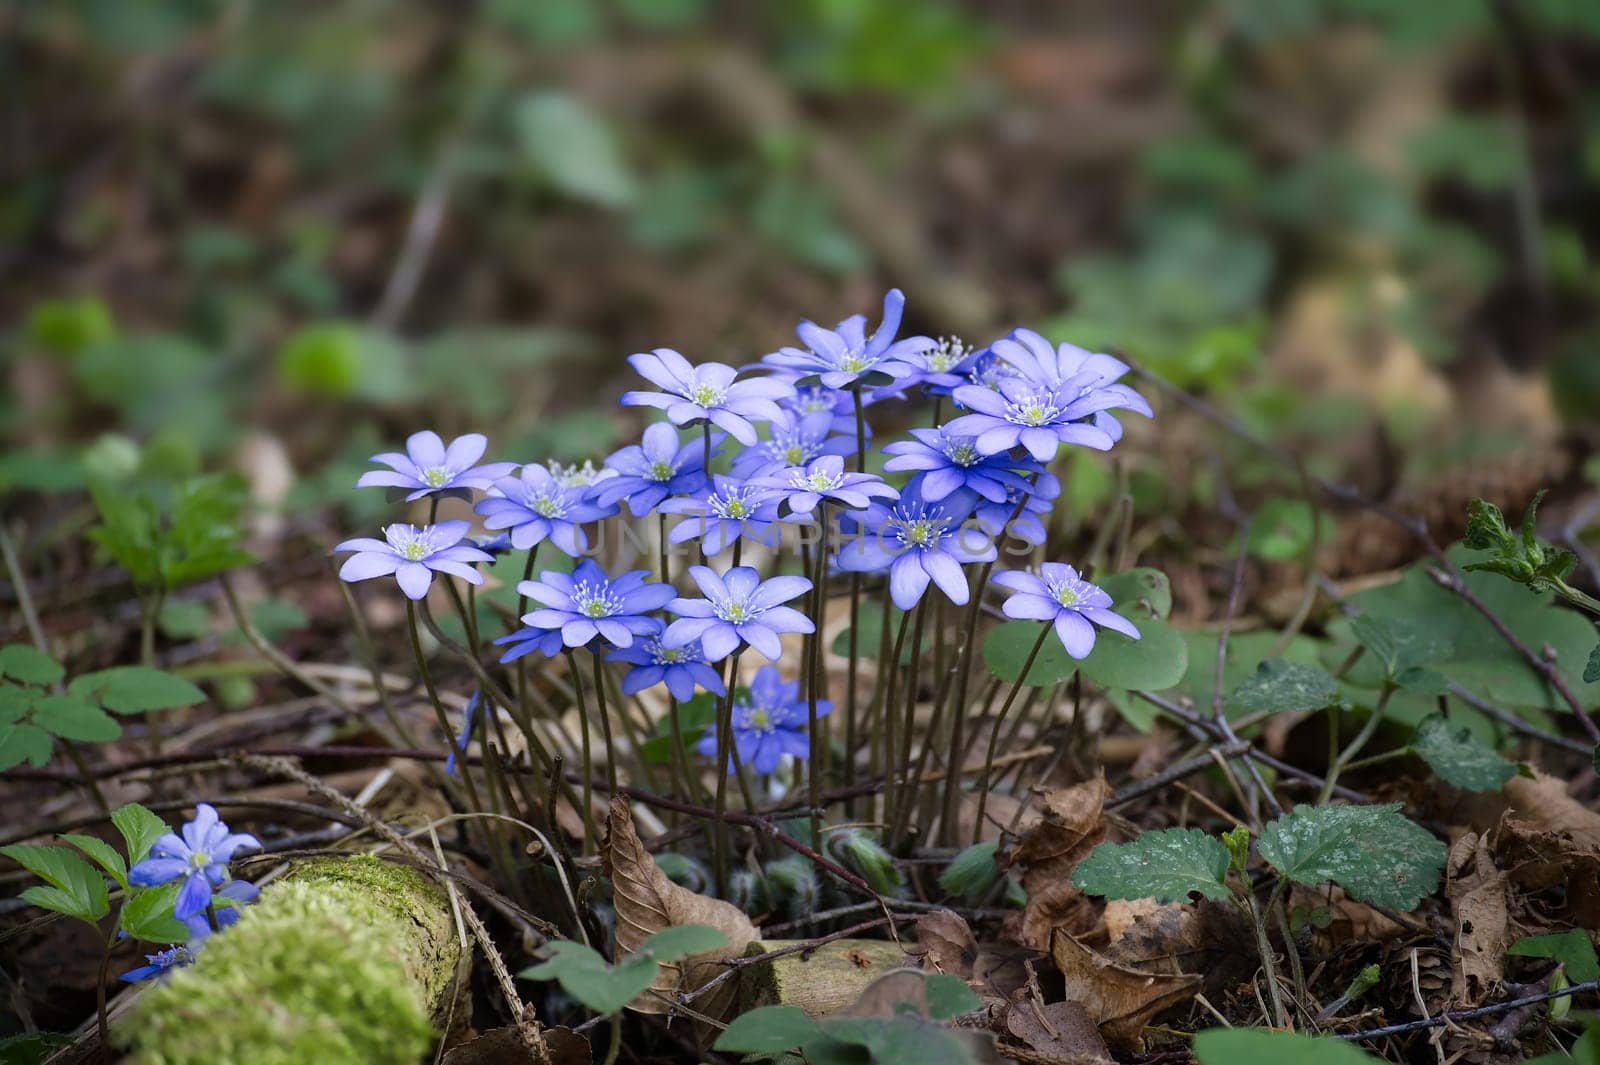 Cluster of Hepatica flowers, with their characteristic blue petals and white centers, nestled within a lush forest environment